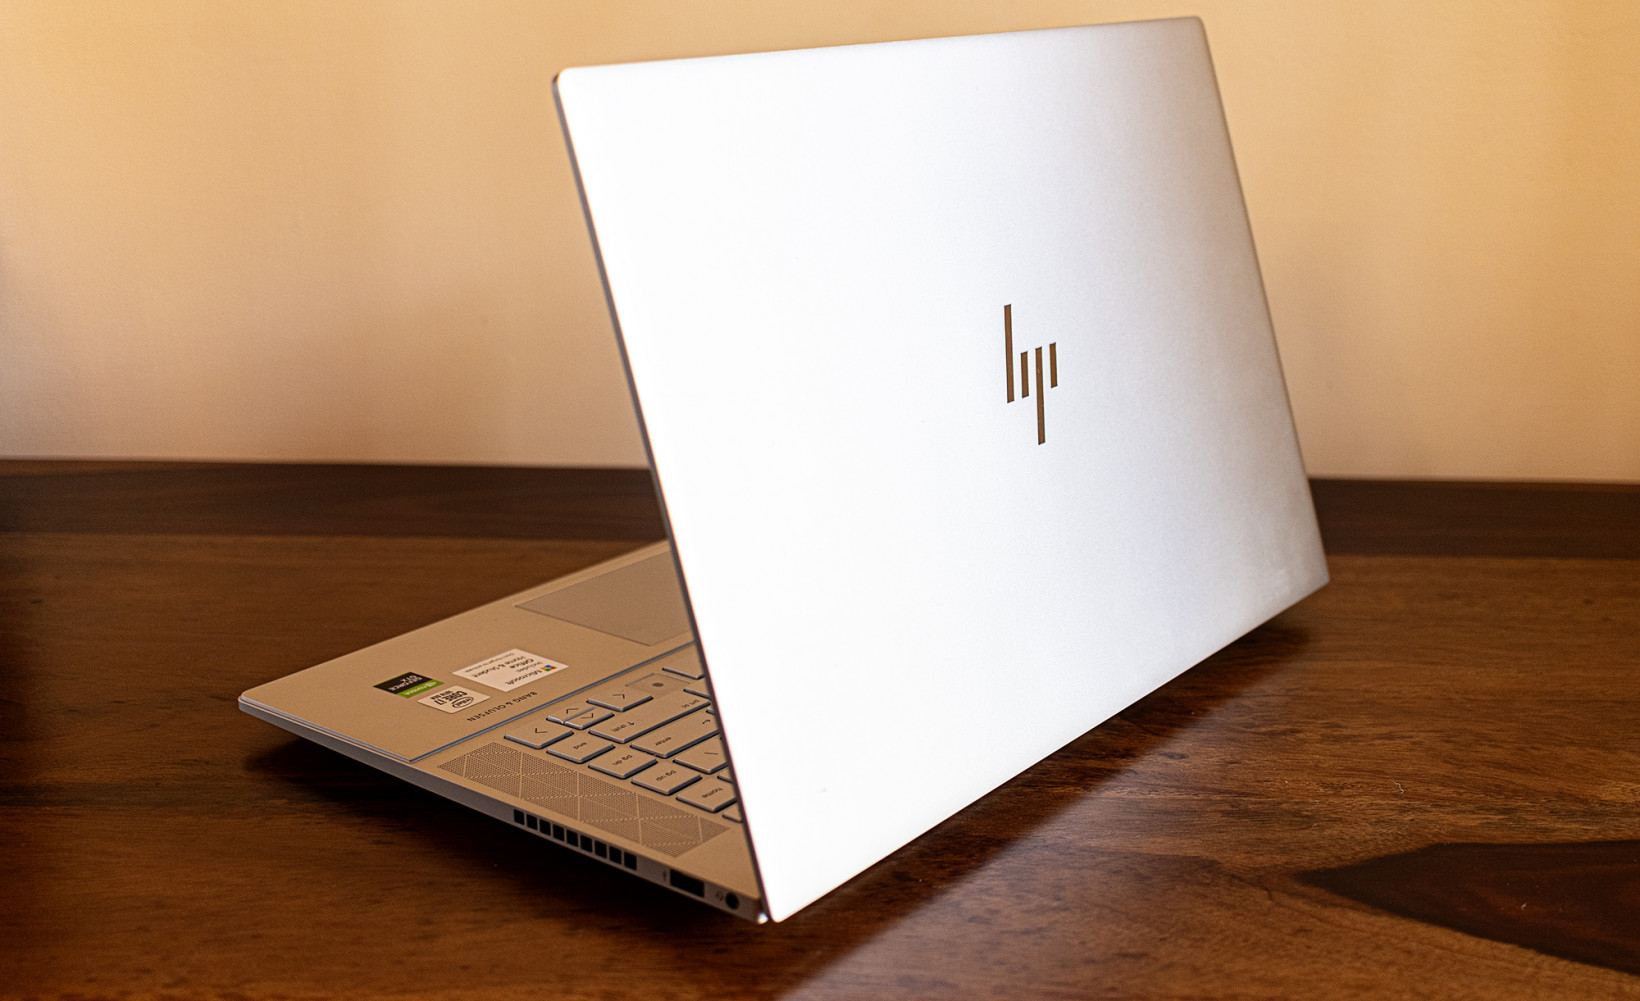 If you like your hardware simple and sophisticated, you'll dig the look of the HP Envy 15